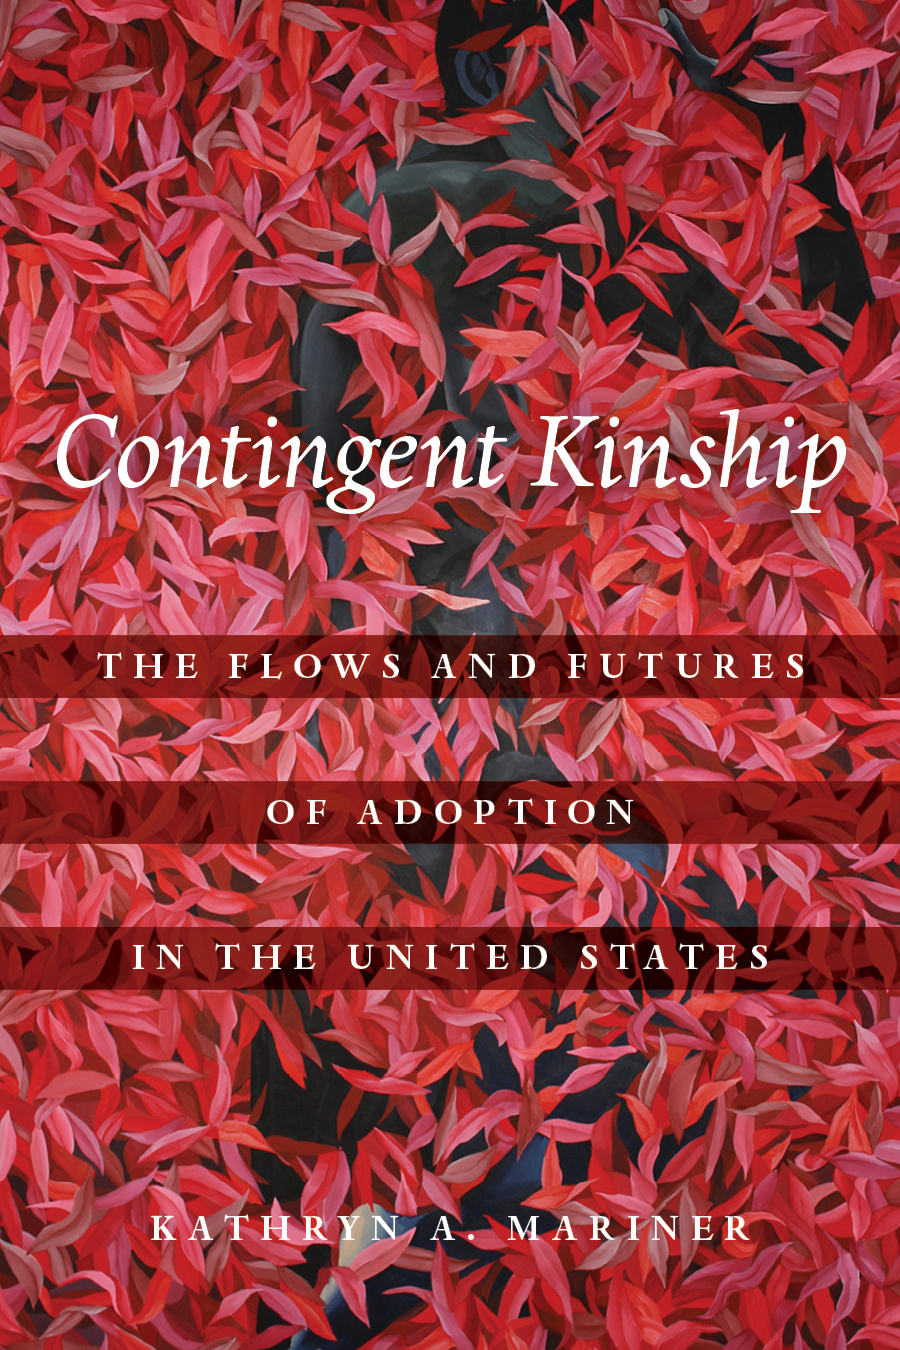 A book cover for the book Contingent Kinship which depicts the text "Contingent Kinship: The Flows and Futures of Adoption in the United States" against a backdrop of red and pink flowers with thin petals.